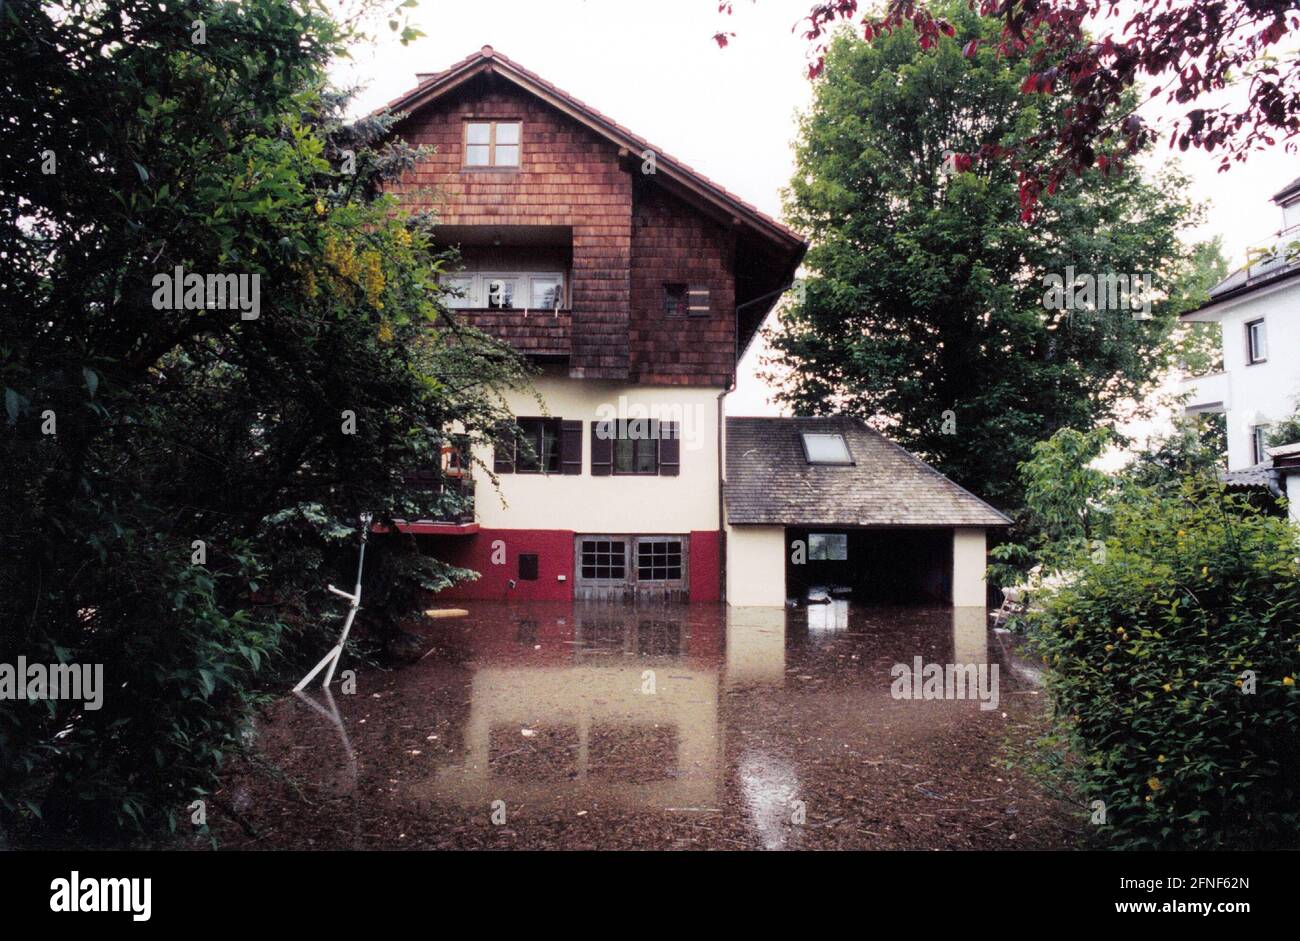 Series of floods of the century in Upper Bavaria, Whitsun, 23rd May 1999. Particularly badly affected, all properties lying directly on the lake, as here in Summerstraße in Herrsching am Ammersee. [automated translation] Stock Photo